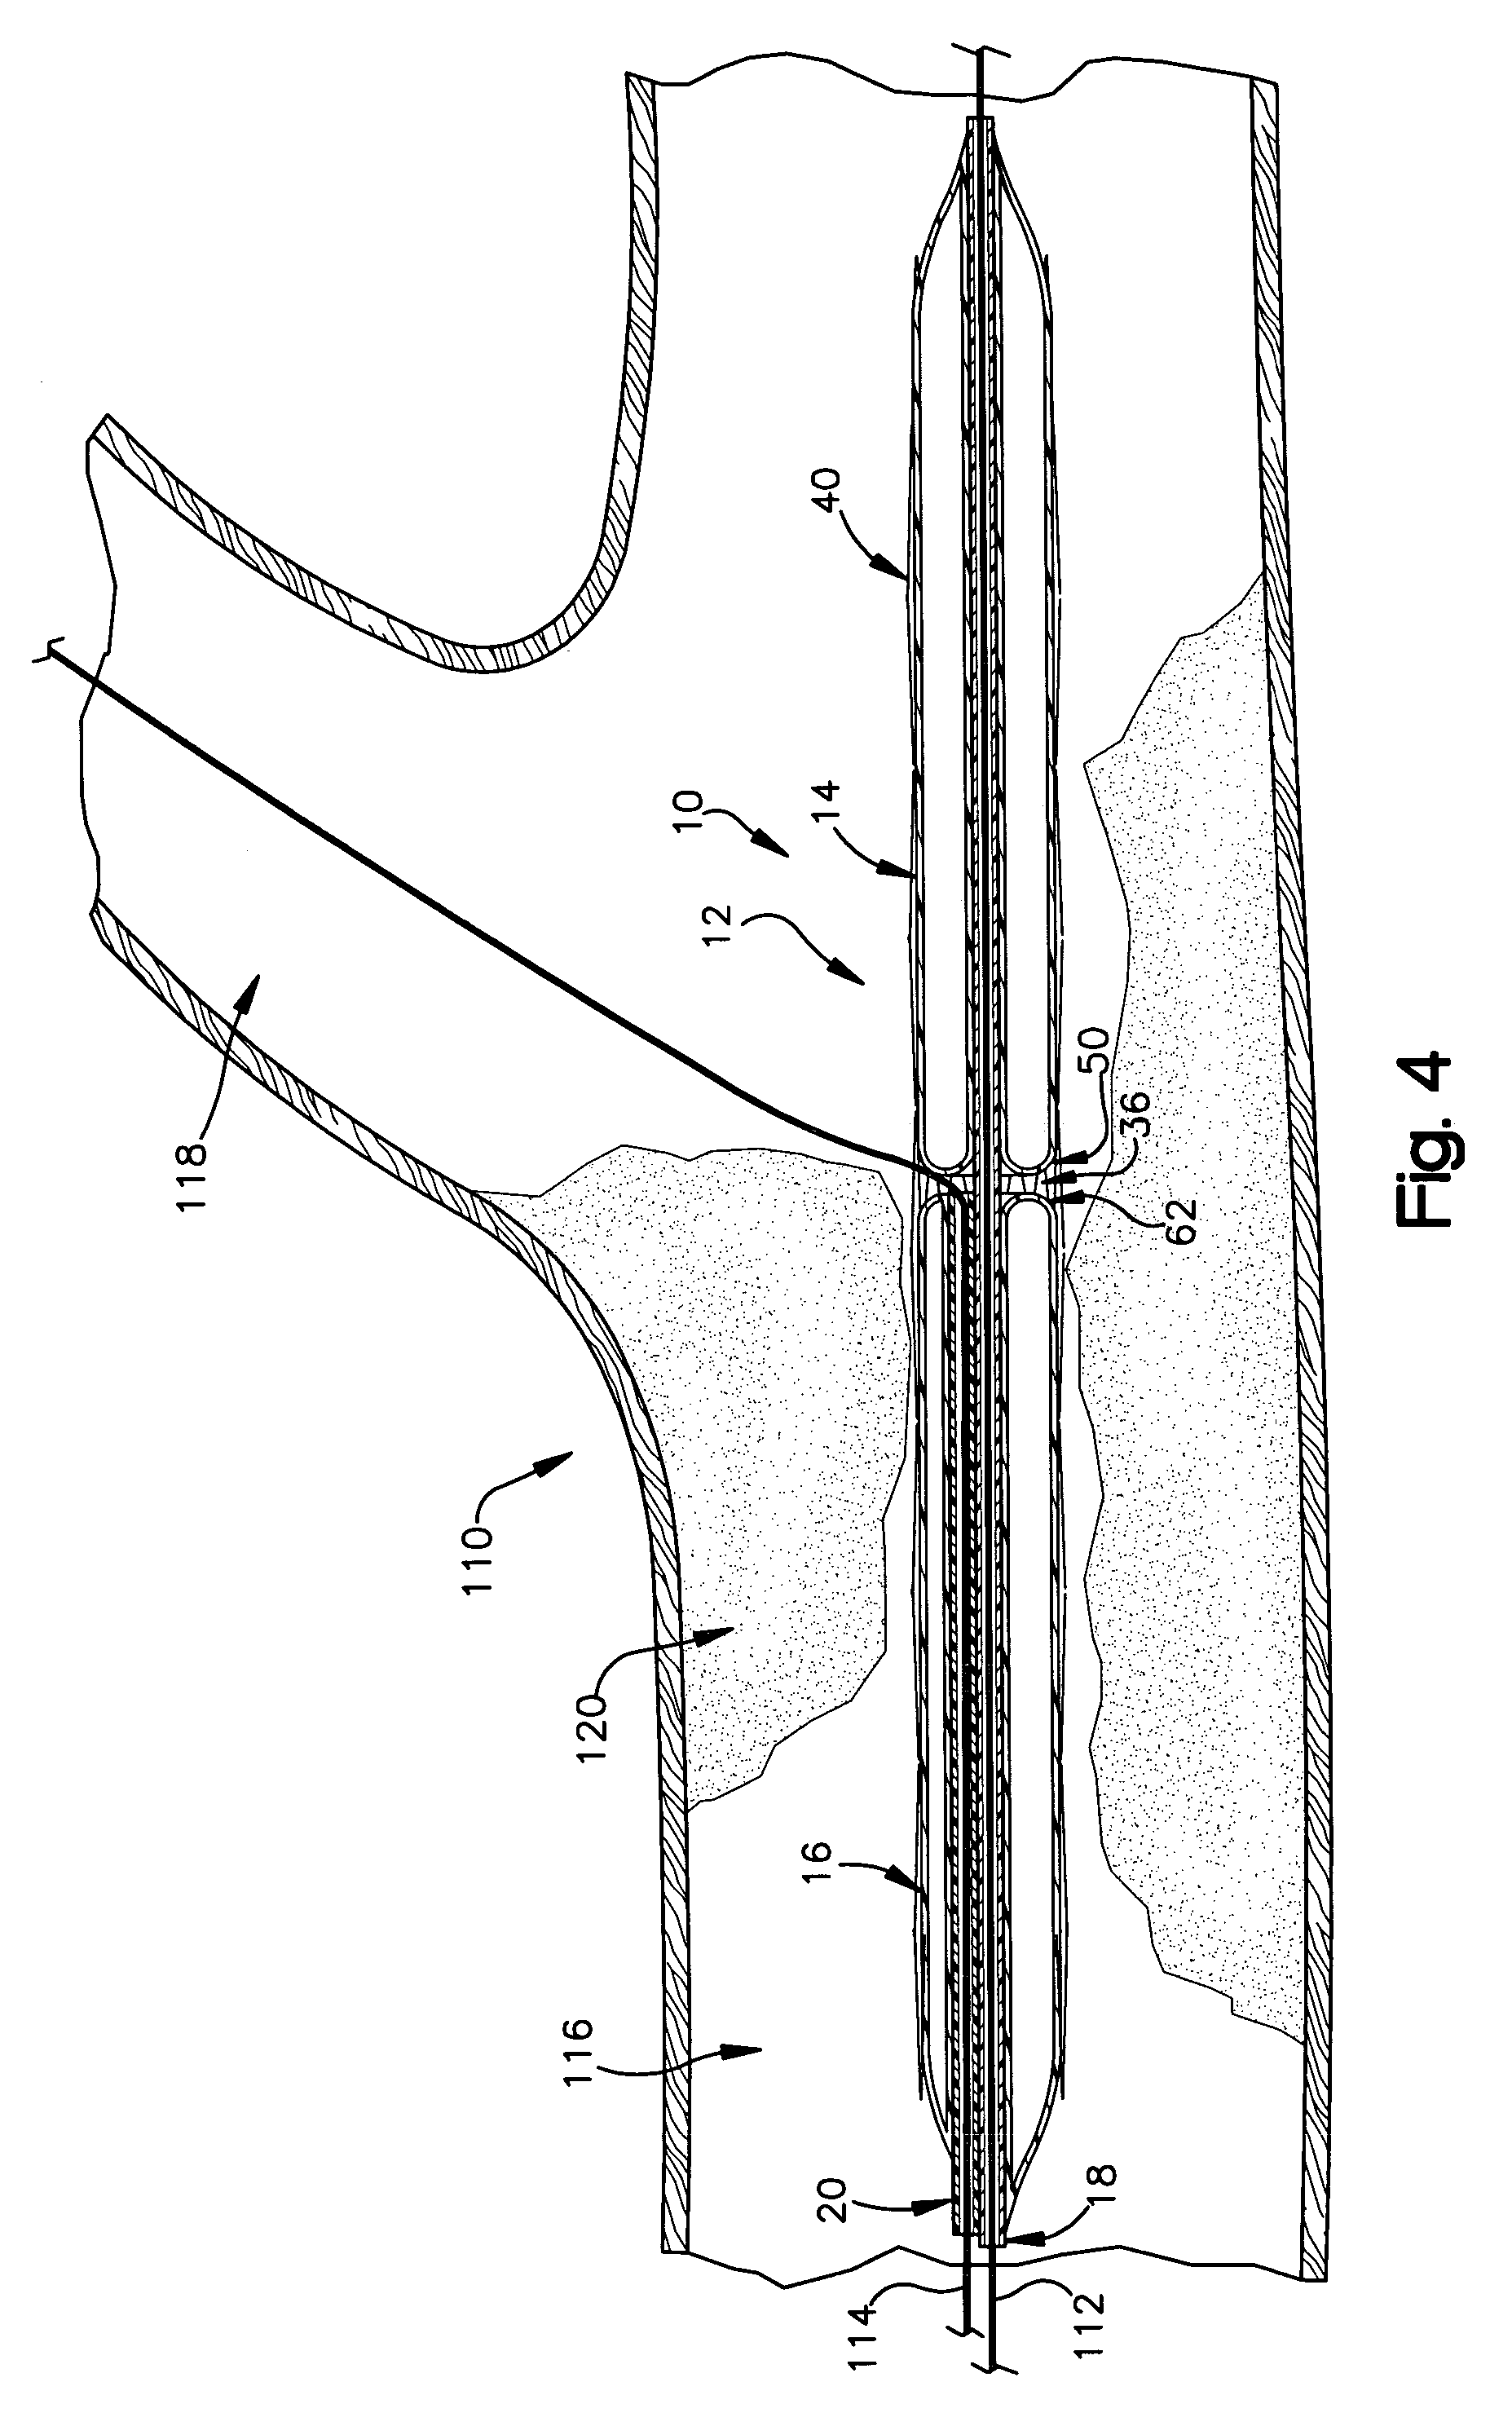 Apparatus for treating atherosclerosis